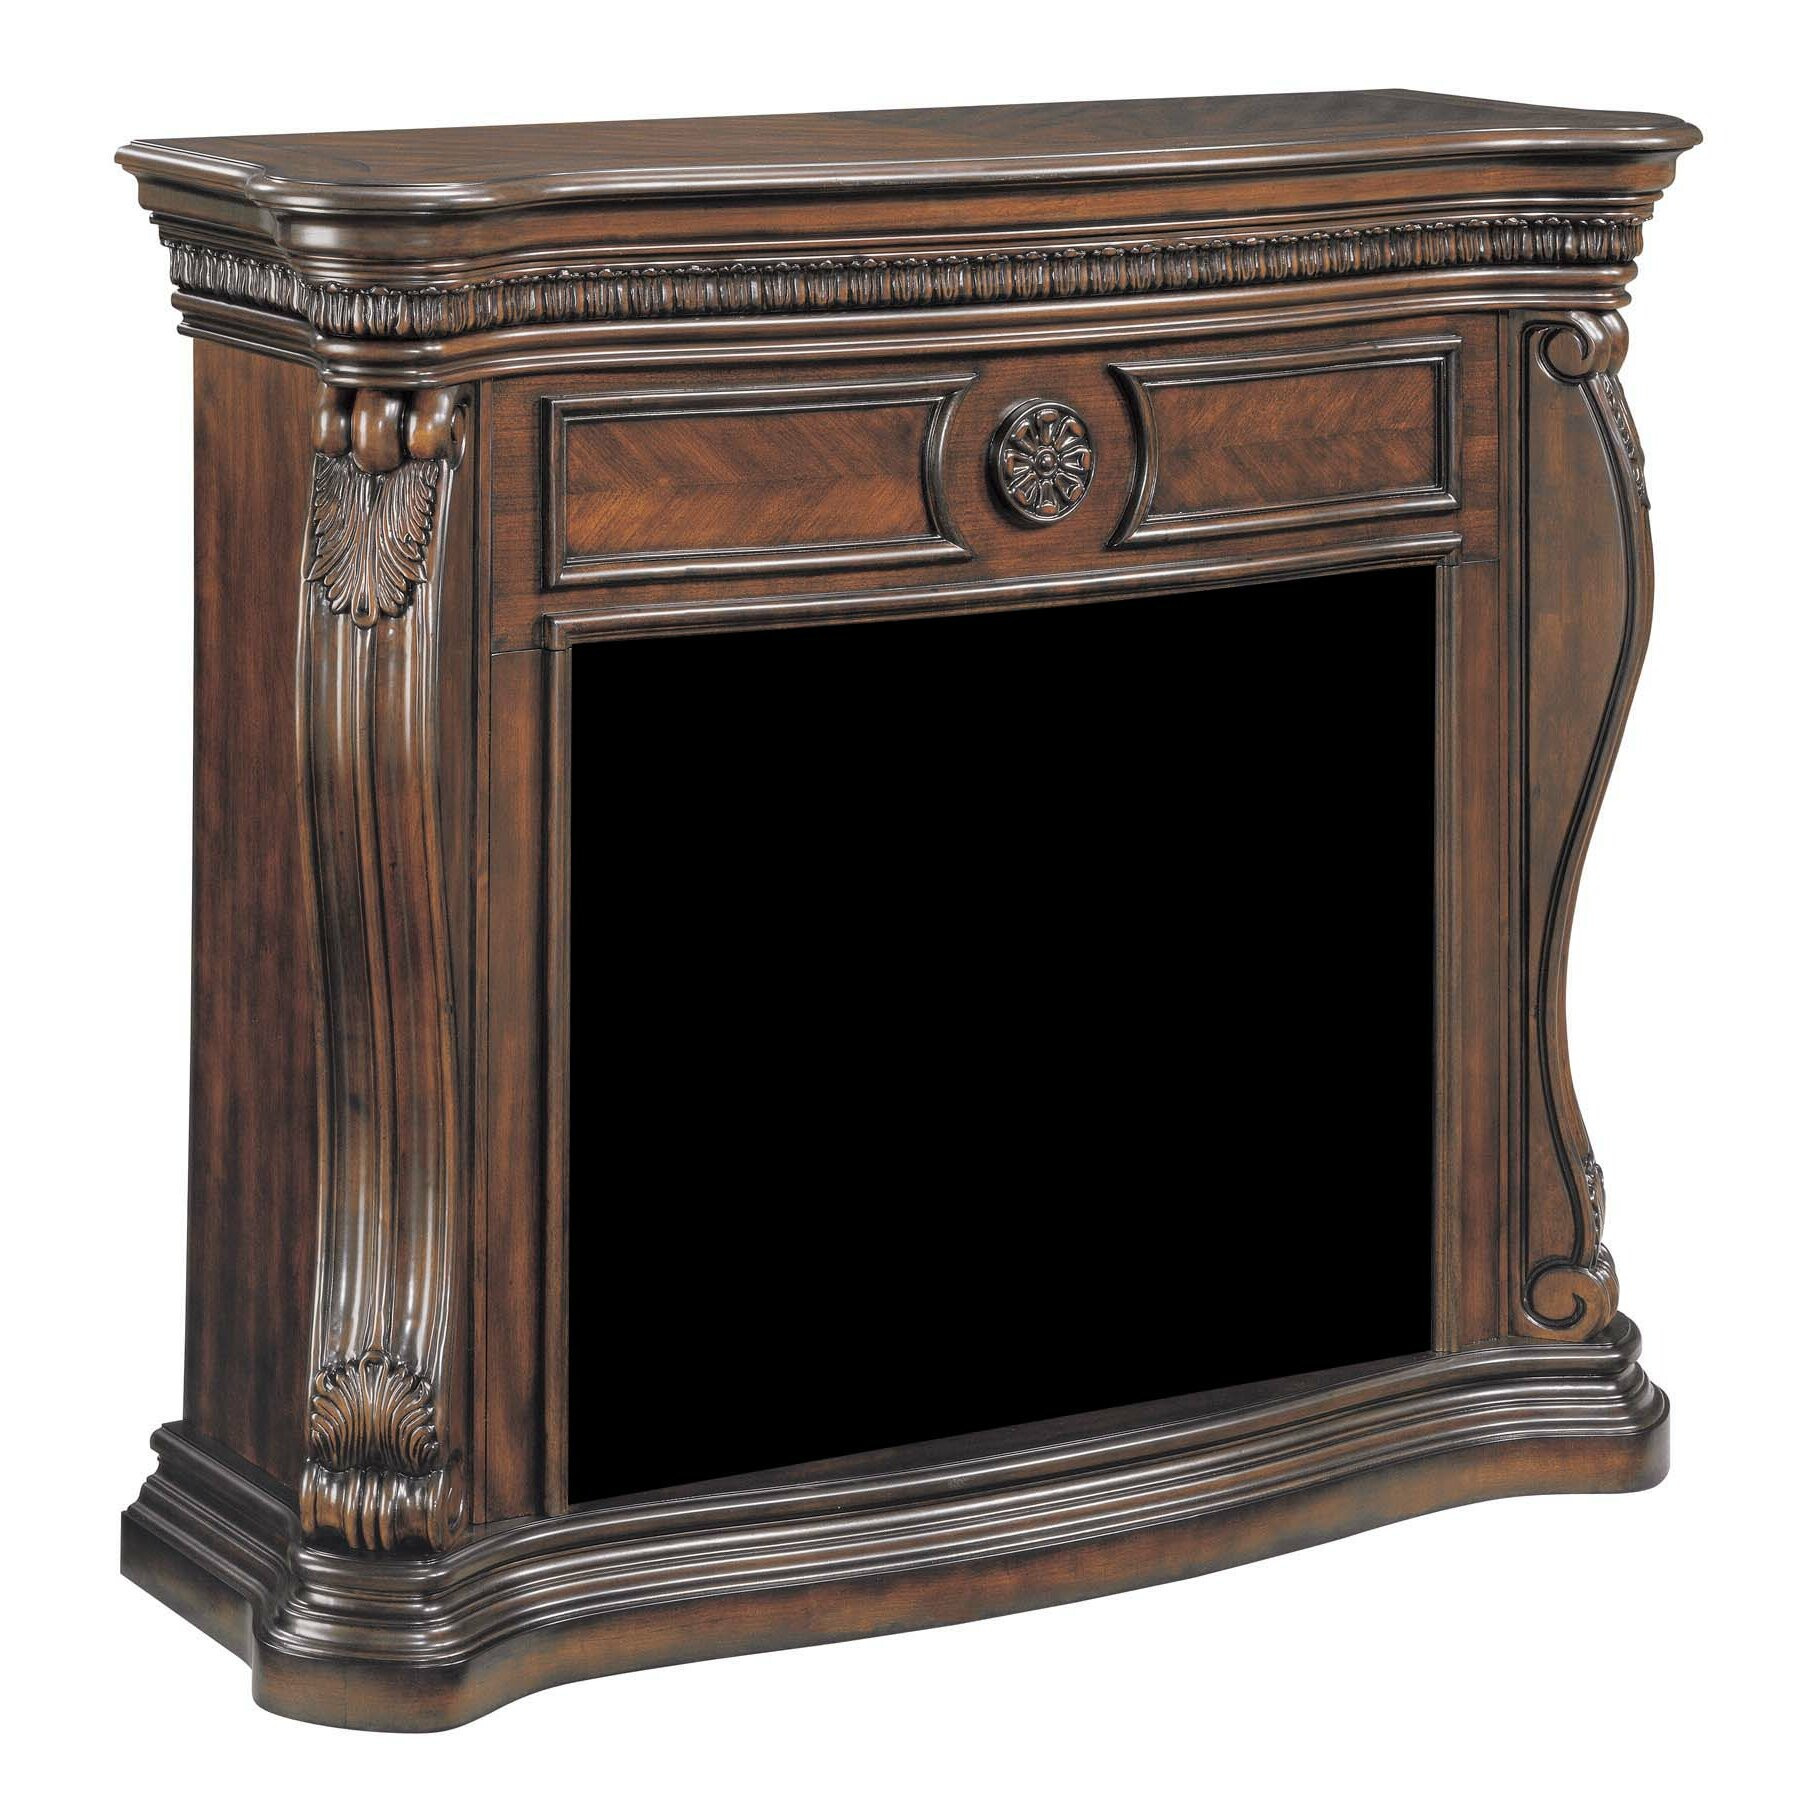 Classic Flame Electric Fireplace
 Classic Flame Lexington Electric Fireplace Mantel Surround